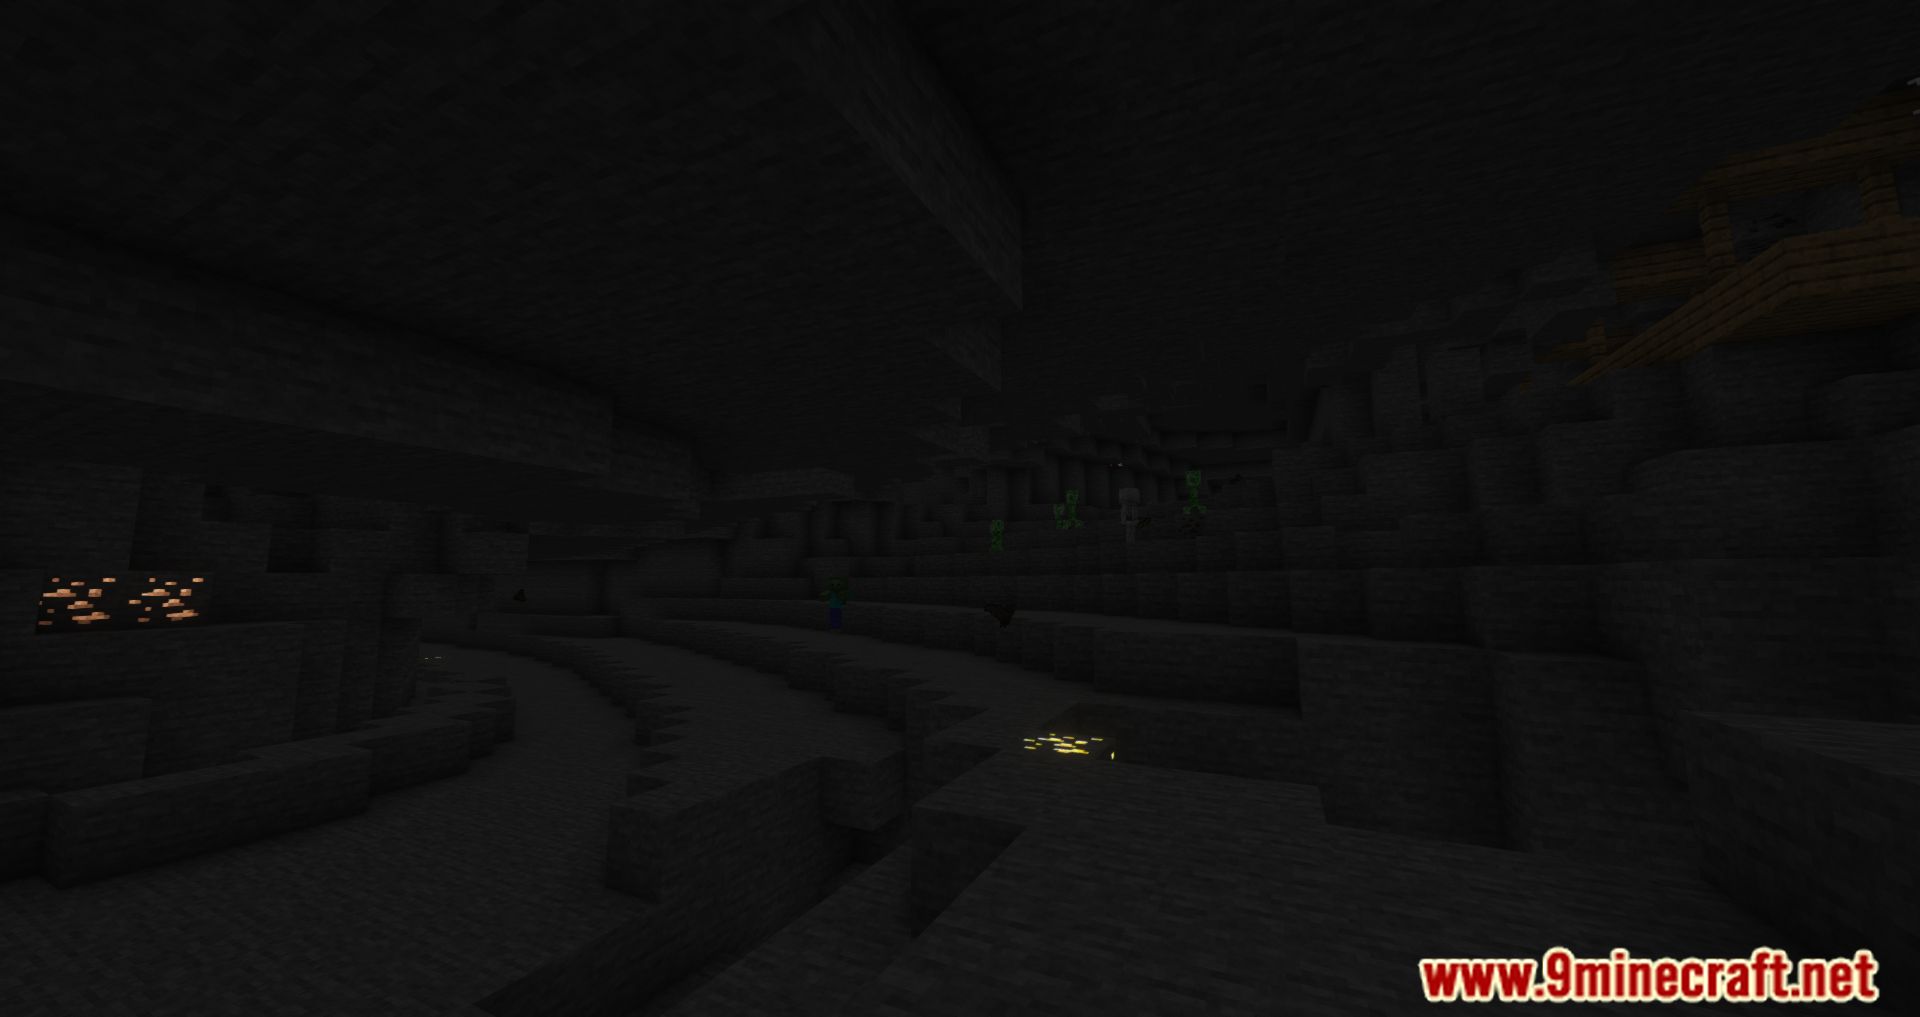 Cave Generator Mod (1.16.5, 1.12.2) - Fully Customize Mojang's Tunnels 3